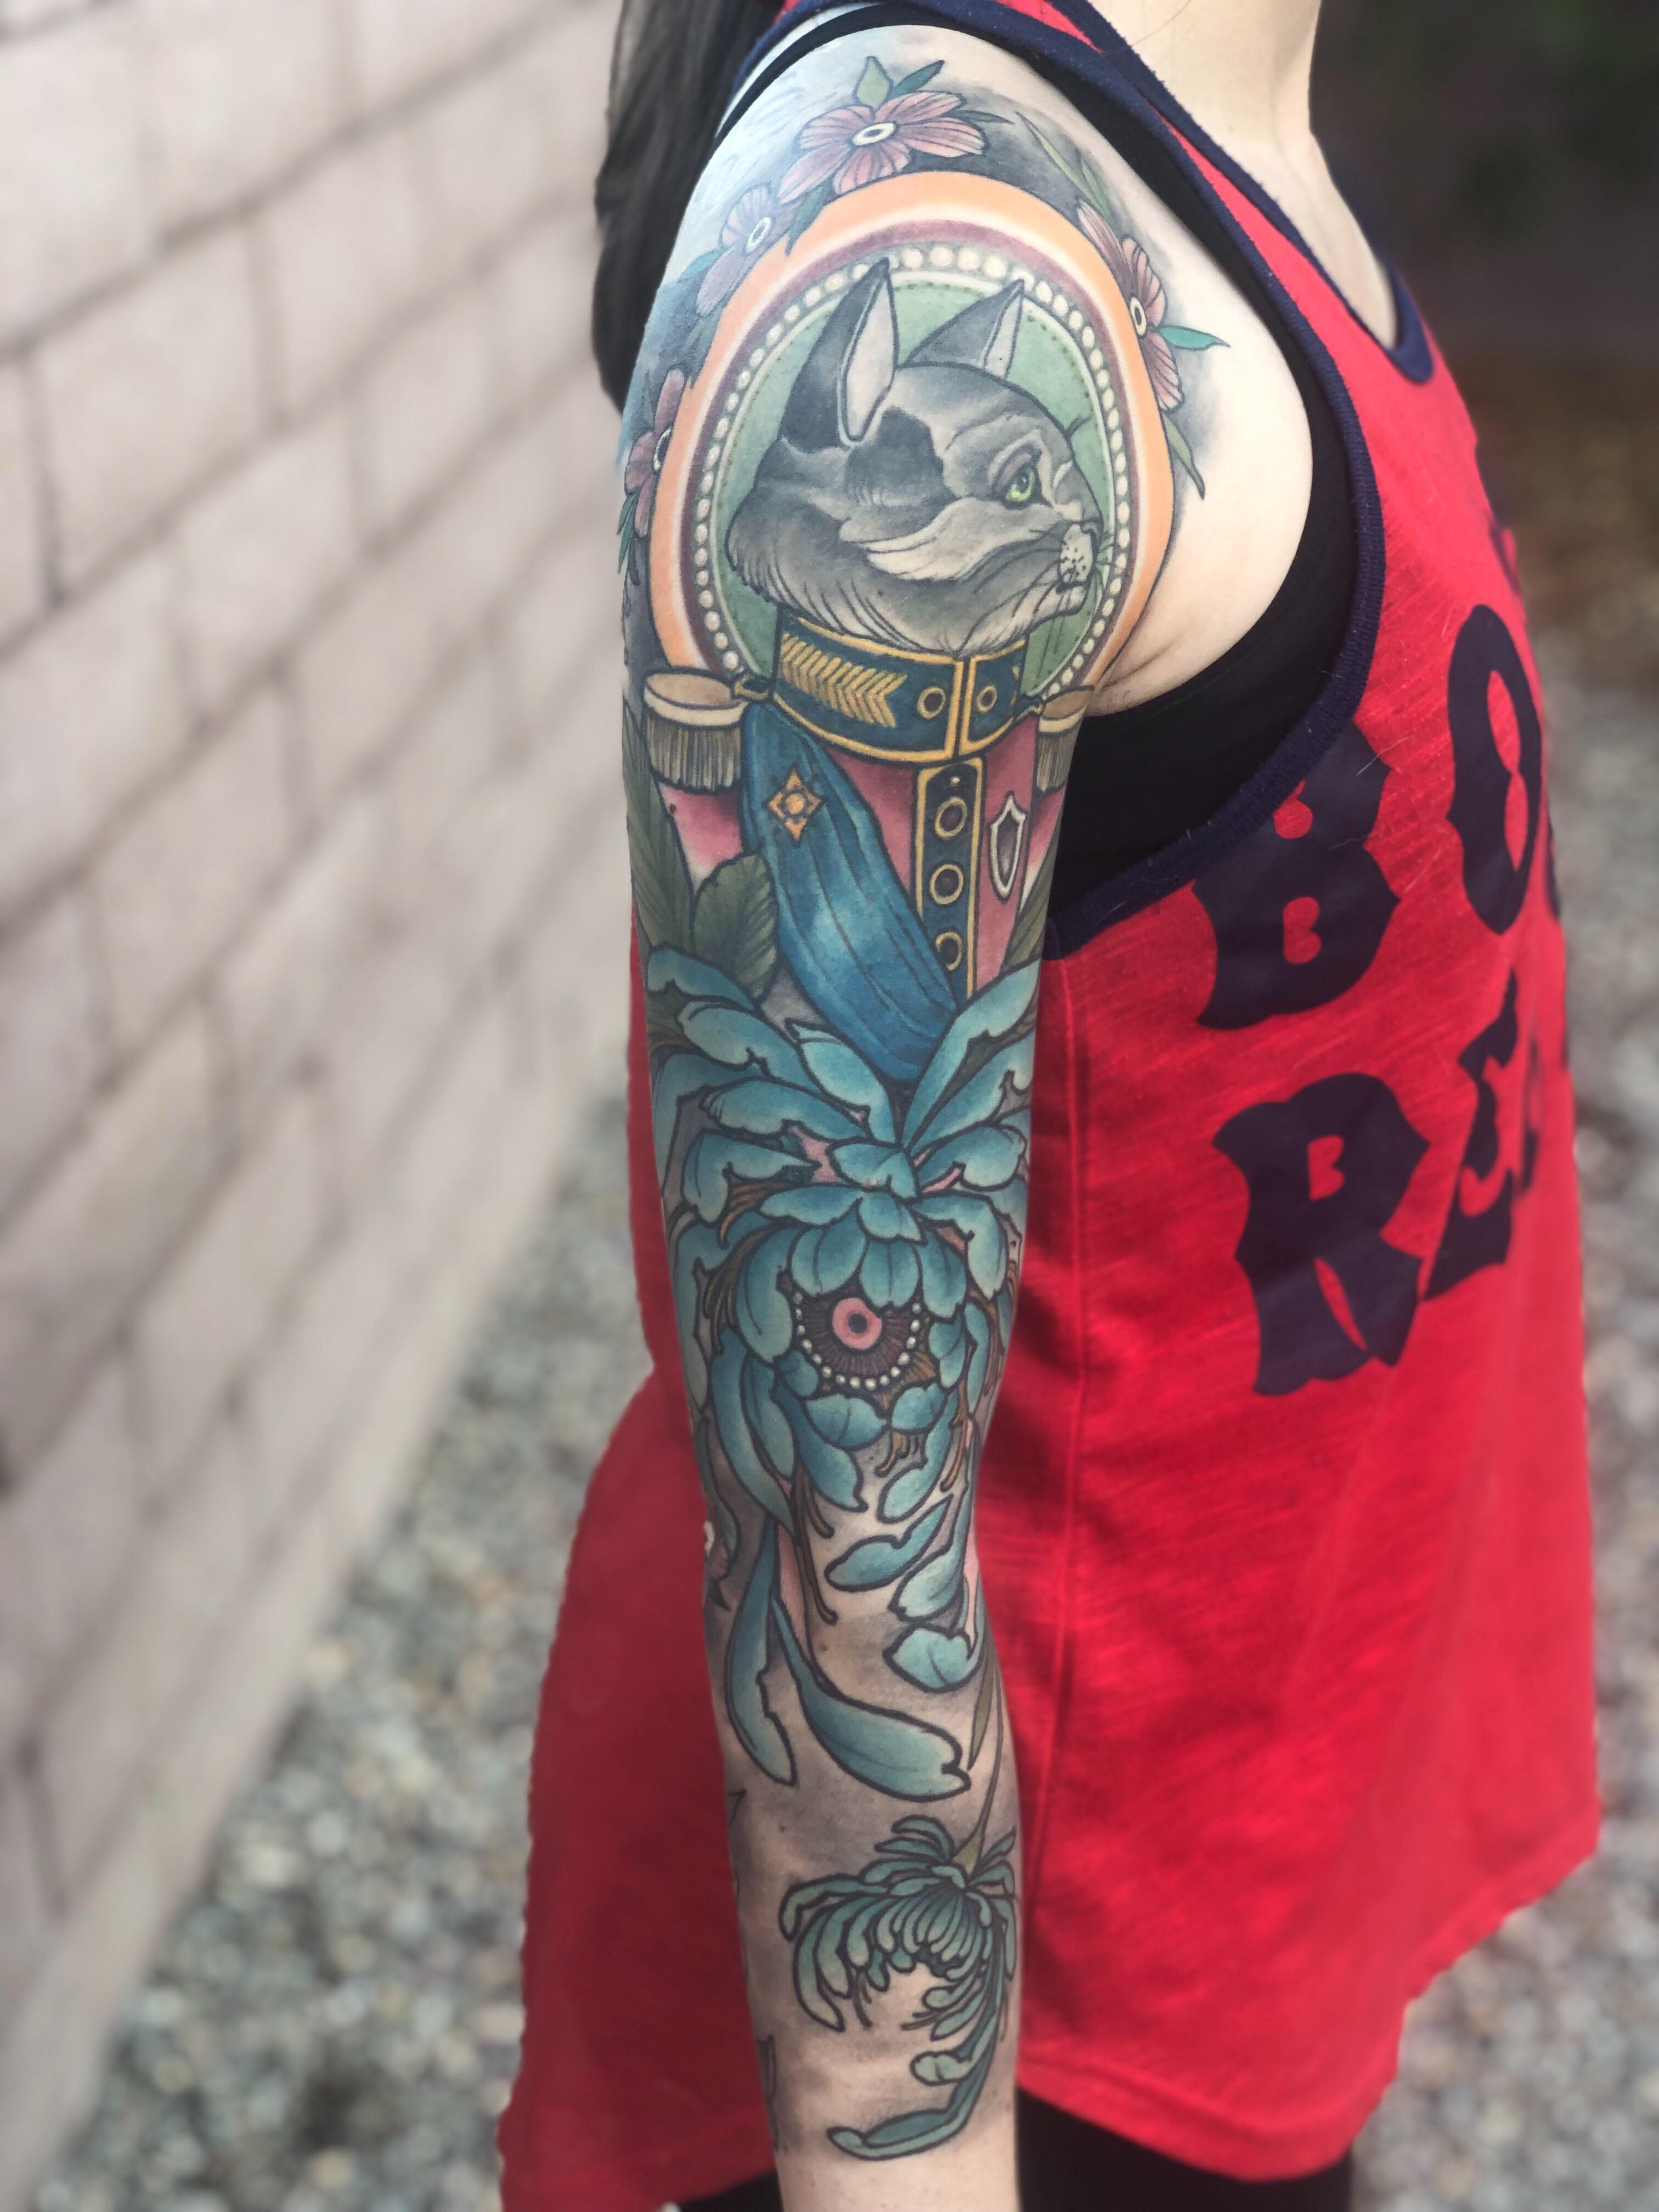 My Sleeve Is Finally Done And I’m So Happy About It!